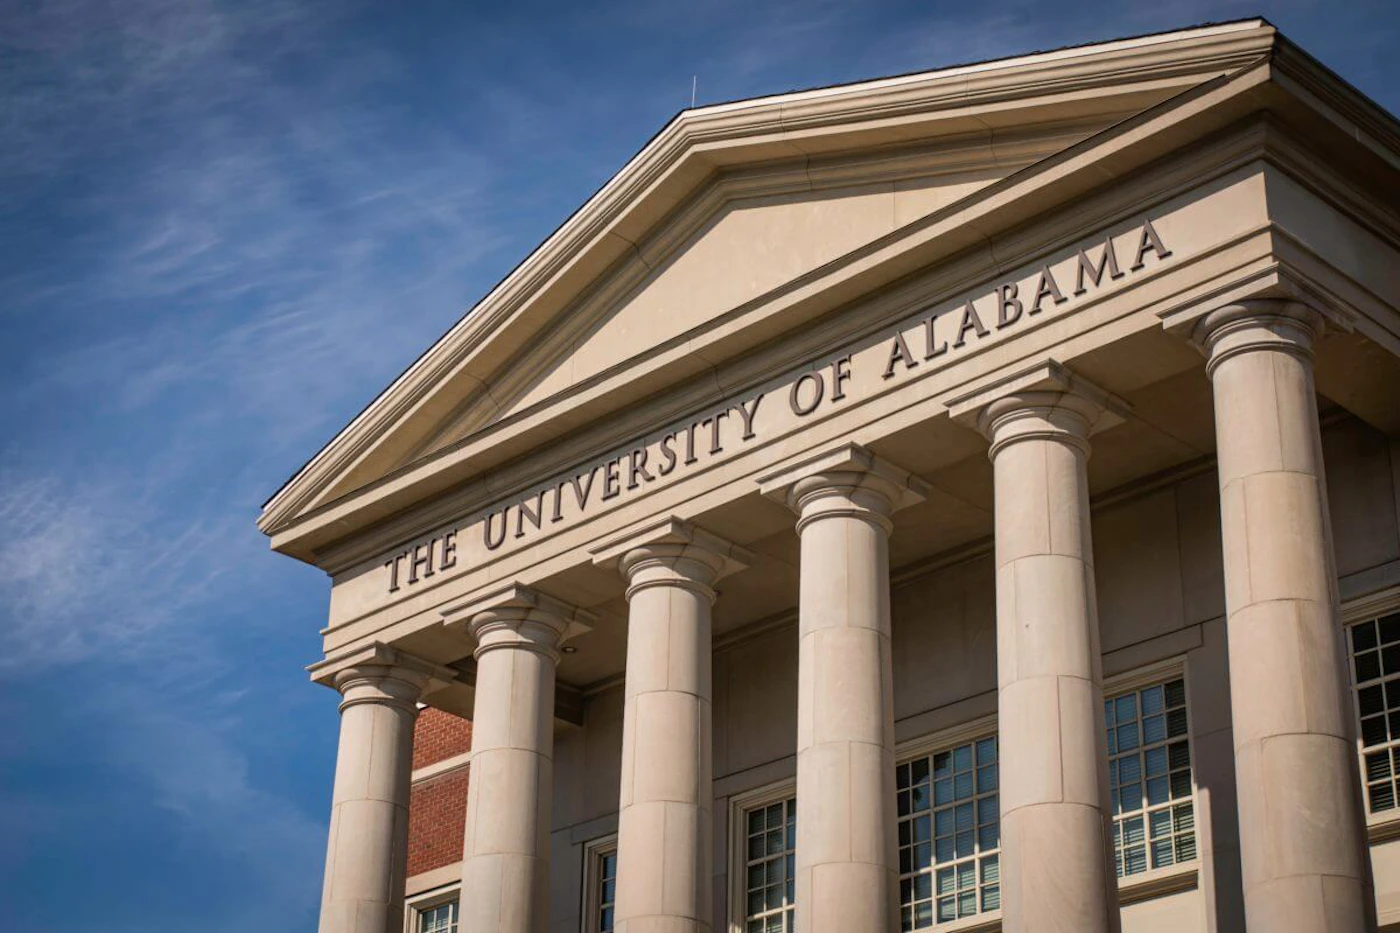 The University of Alabama, in Tuscaloosa, is home to one of the largest college outbreaks of COVID-19 in the United States (Shutterstock/Travel_with_me).